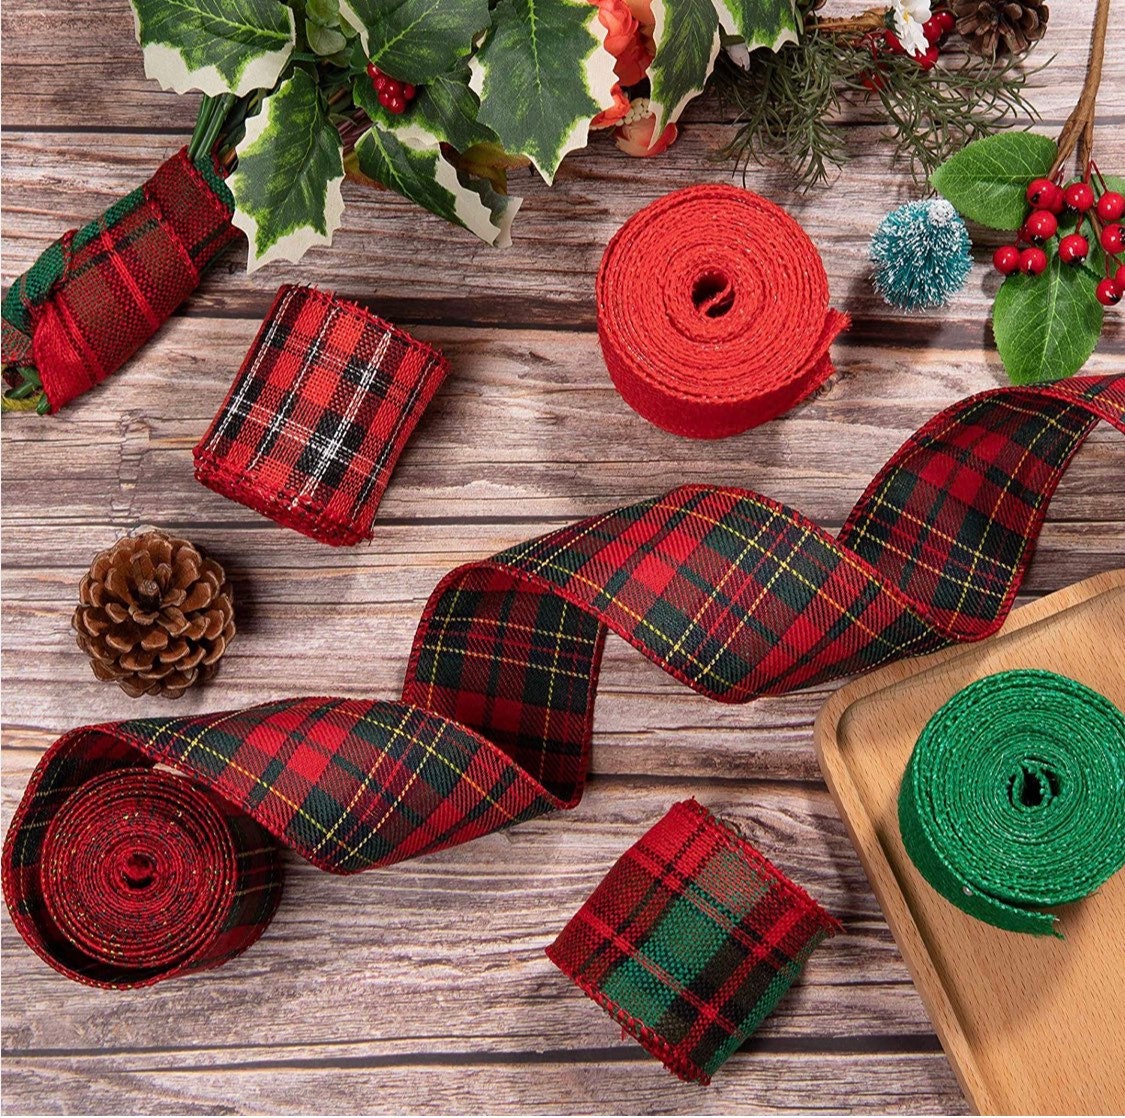 Christmas Wired Ribbon Set - 2.5” Mesh Burlap Eco Friendly Plaid Winter Ribbon for Wreaths, Gifts, Decor, and Crafts 2.5” x 5 yards